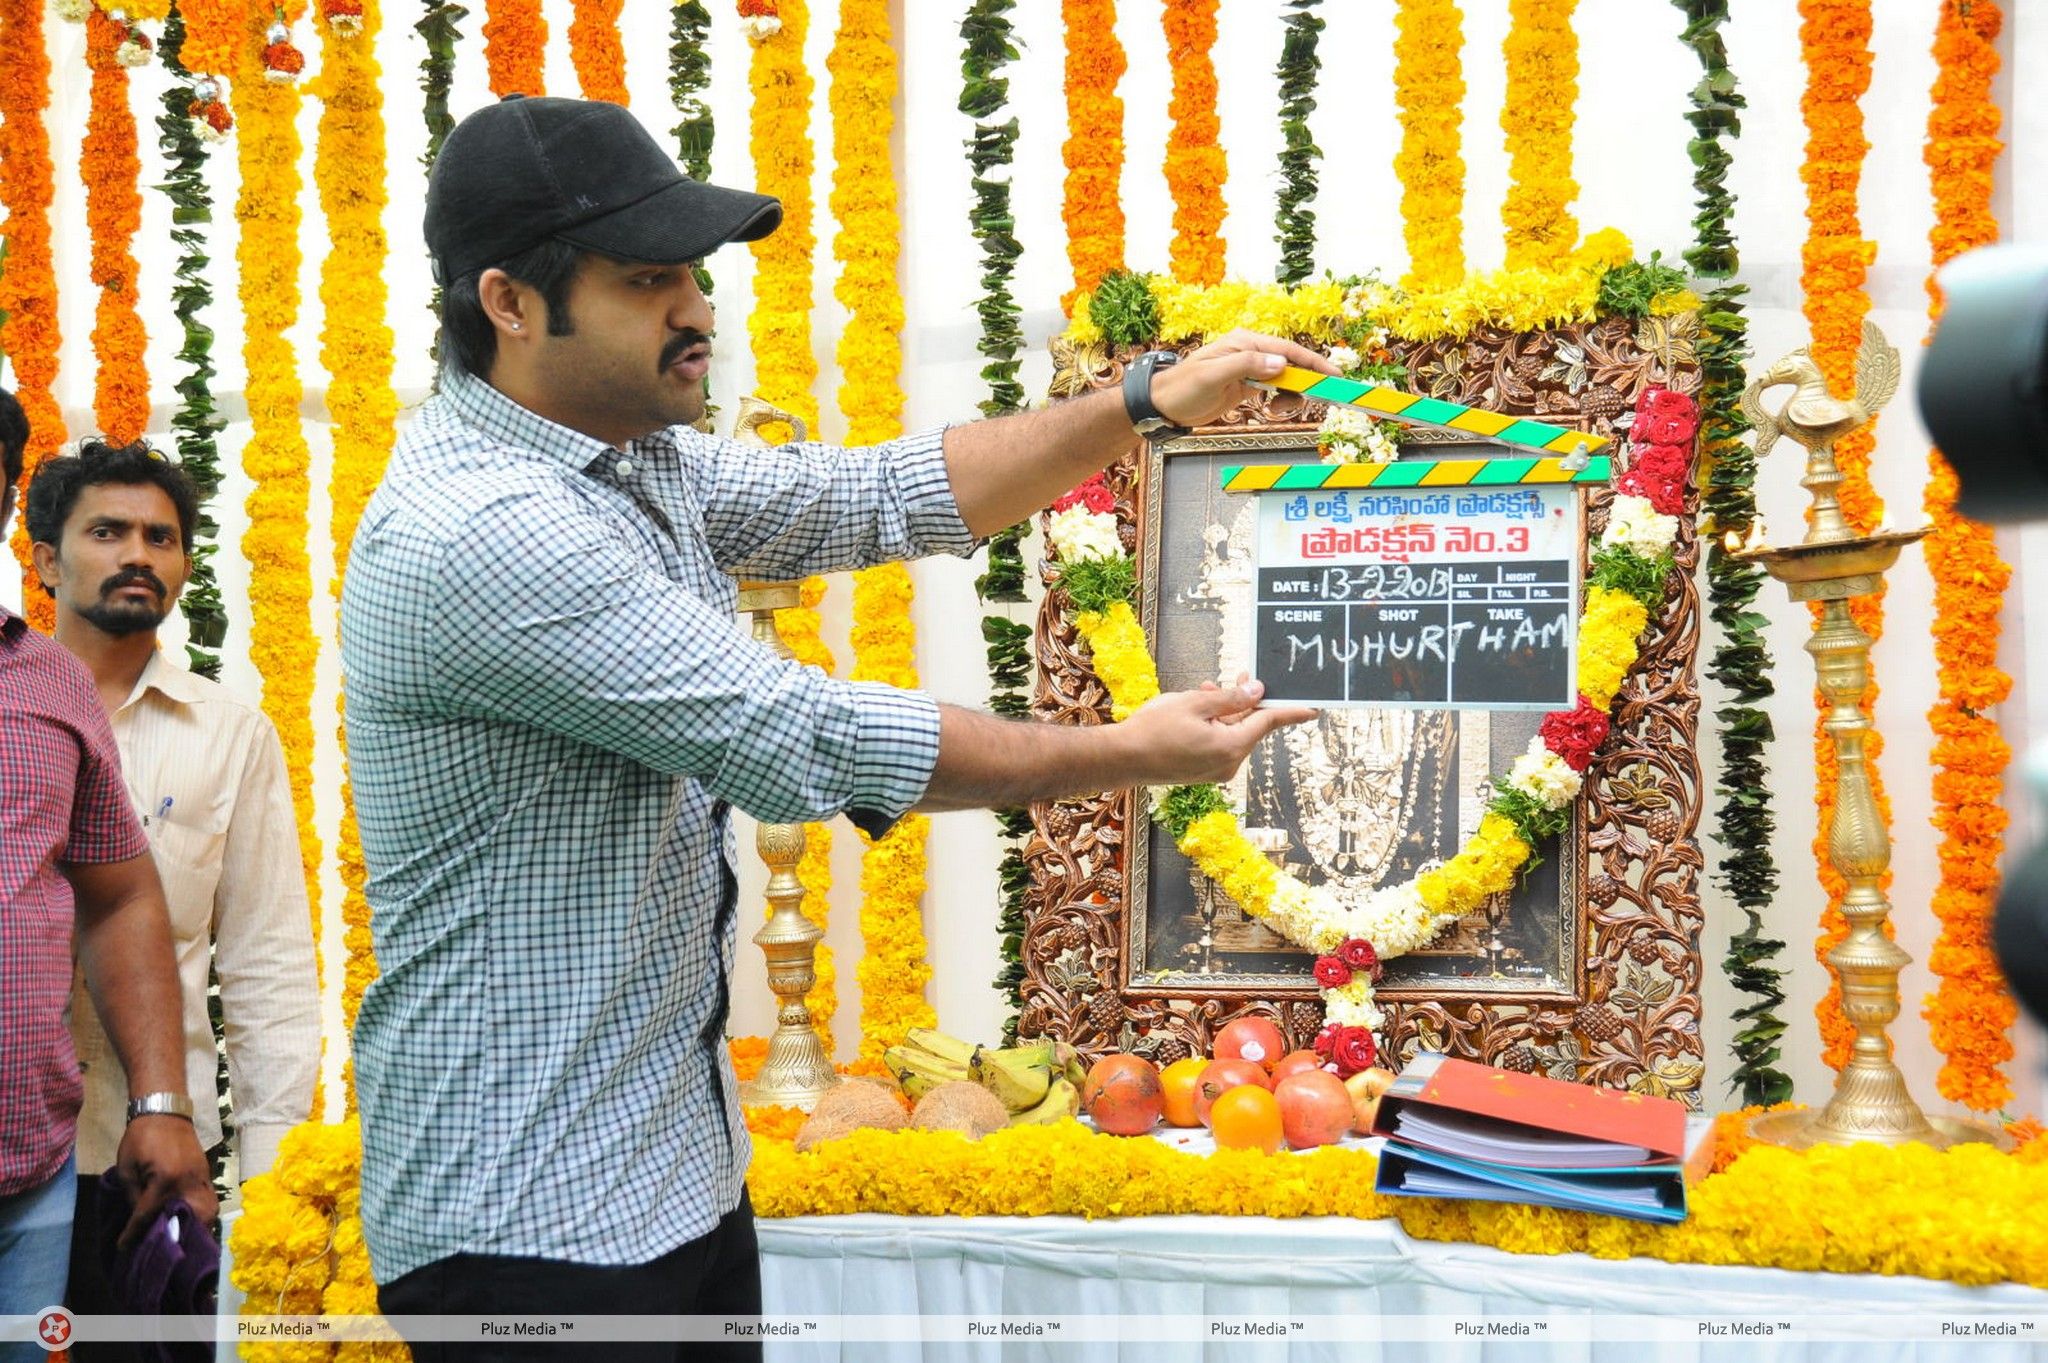 Jr. NTR - Jr.NTR New Film Opening Photos | Picture 382652